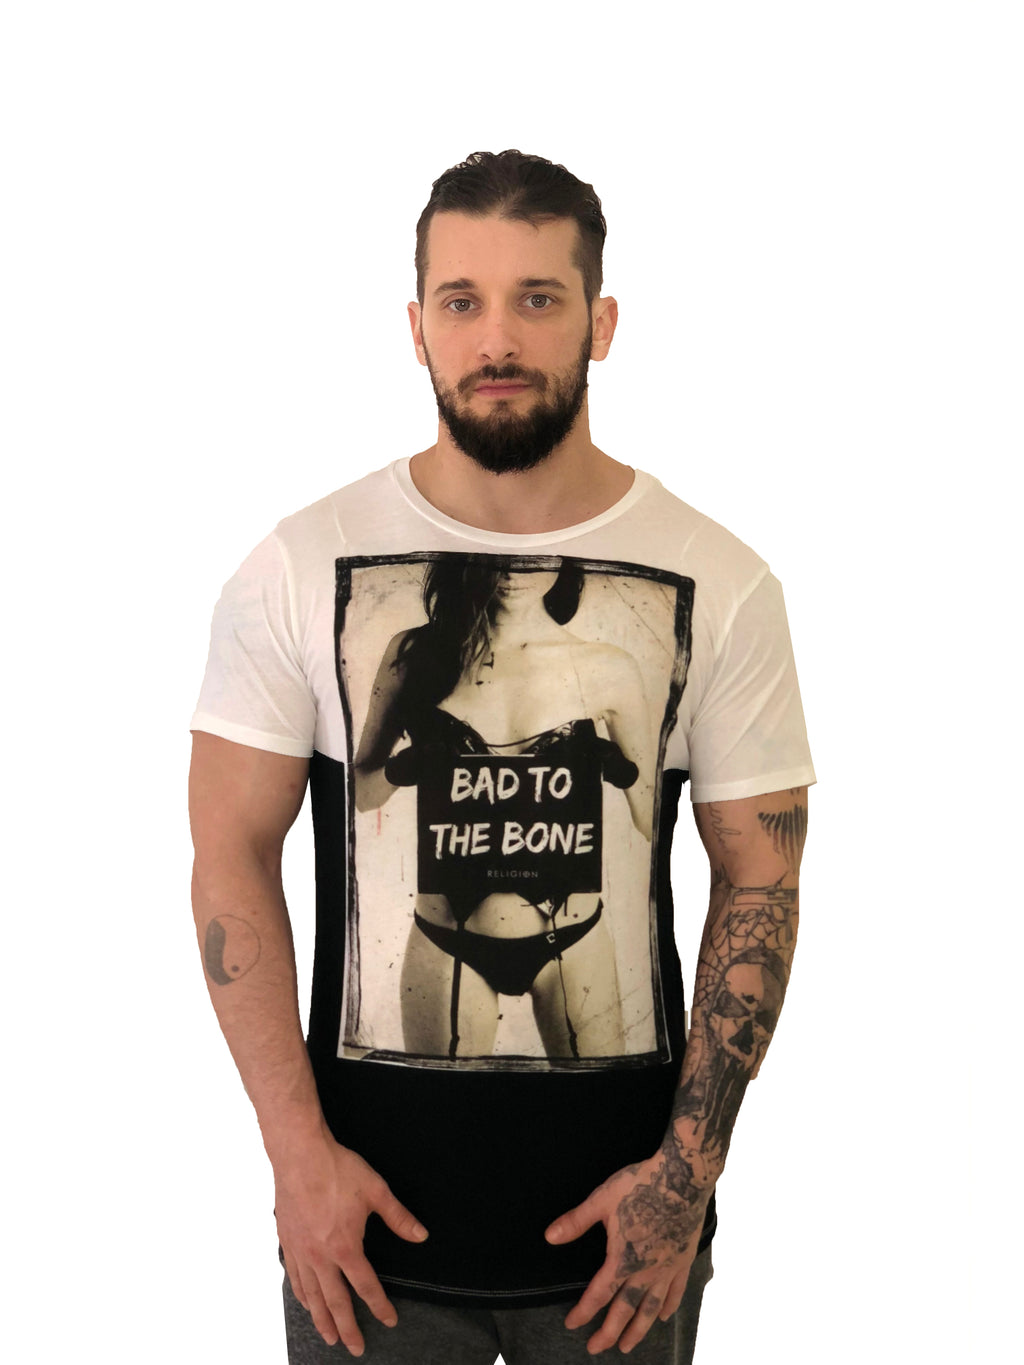 Men T-Shirt "Bad to the Bone" Graphic Two Toned by Religion U.K. - Brit Boss 